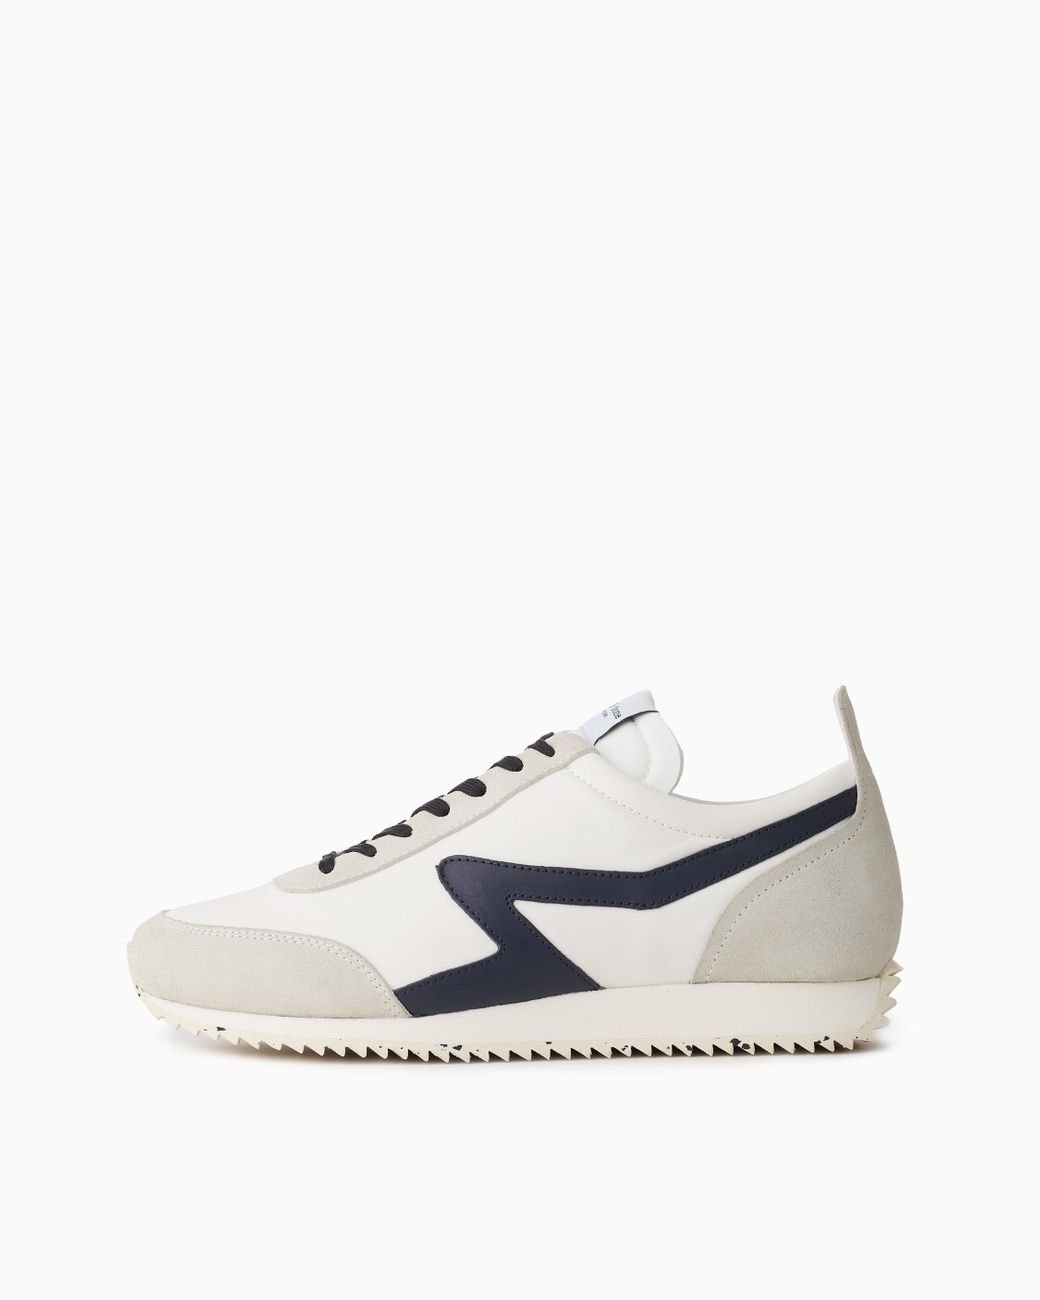 Rag & Bone Retro Runner Leather And Recycled Materials Sneaker in White